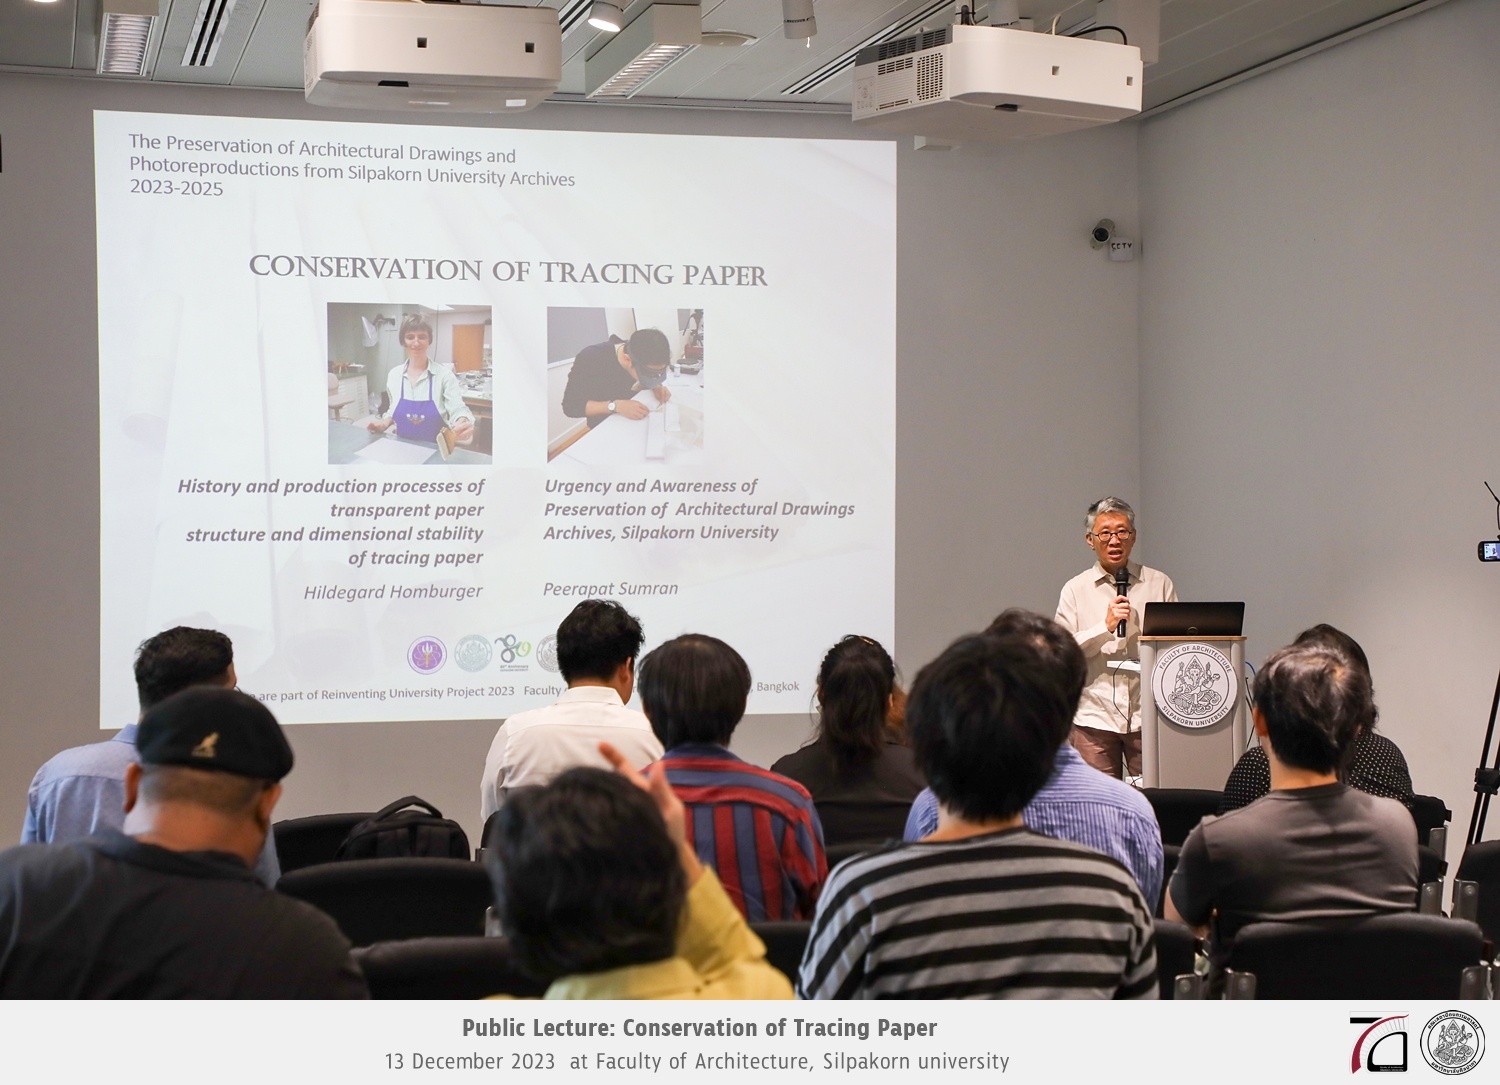 Public Lecture: Conservation of Tracing Paper